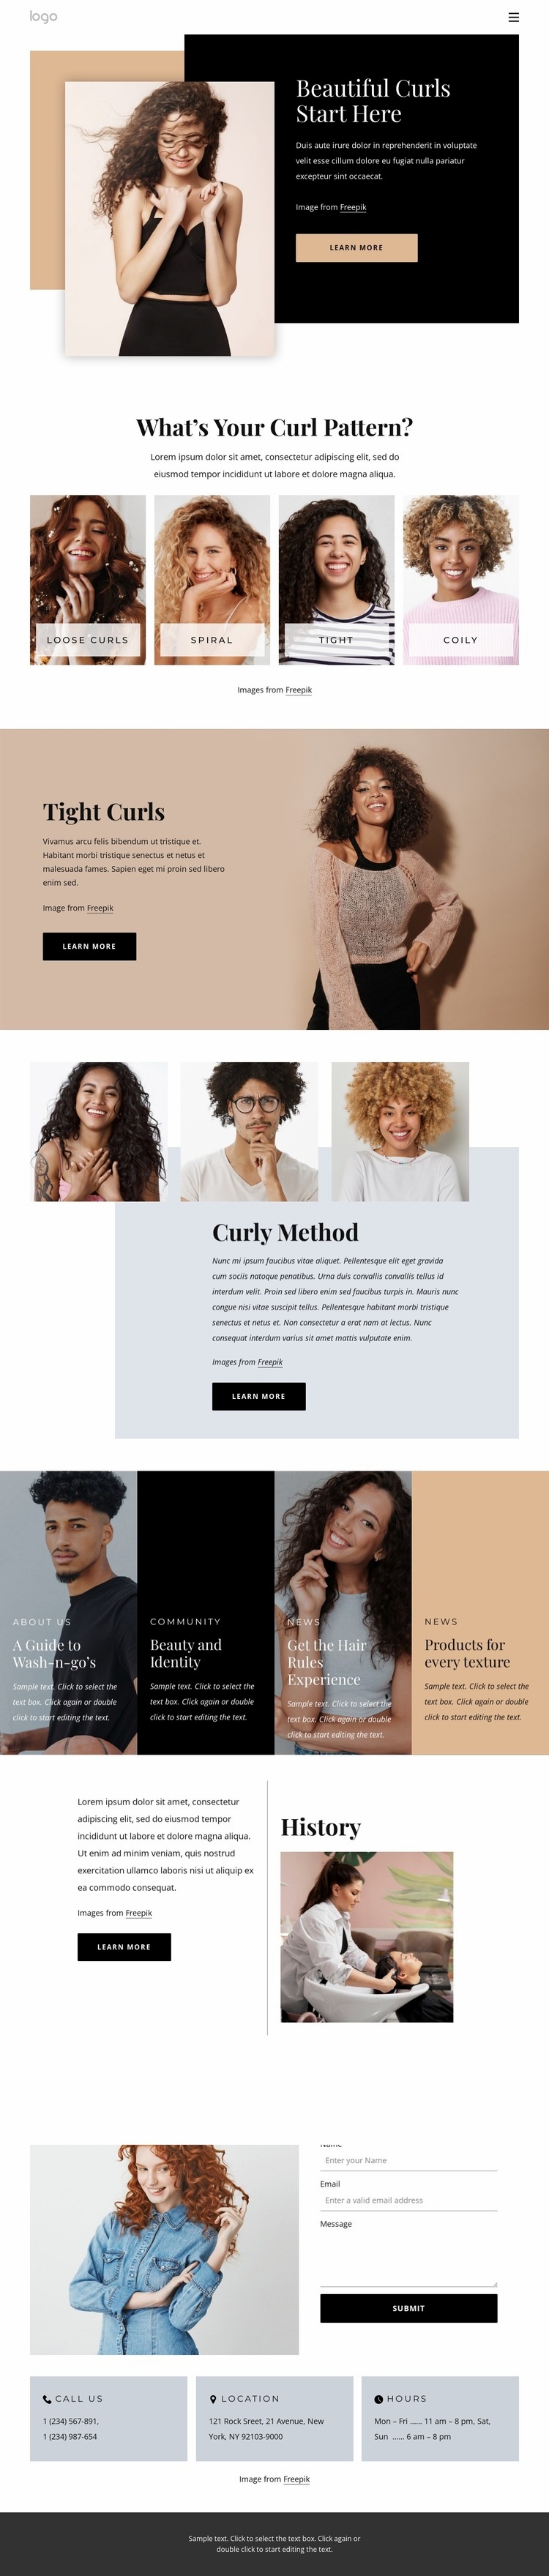 Bring out the best in your curls Homepage Design